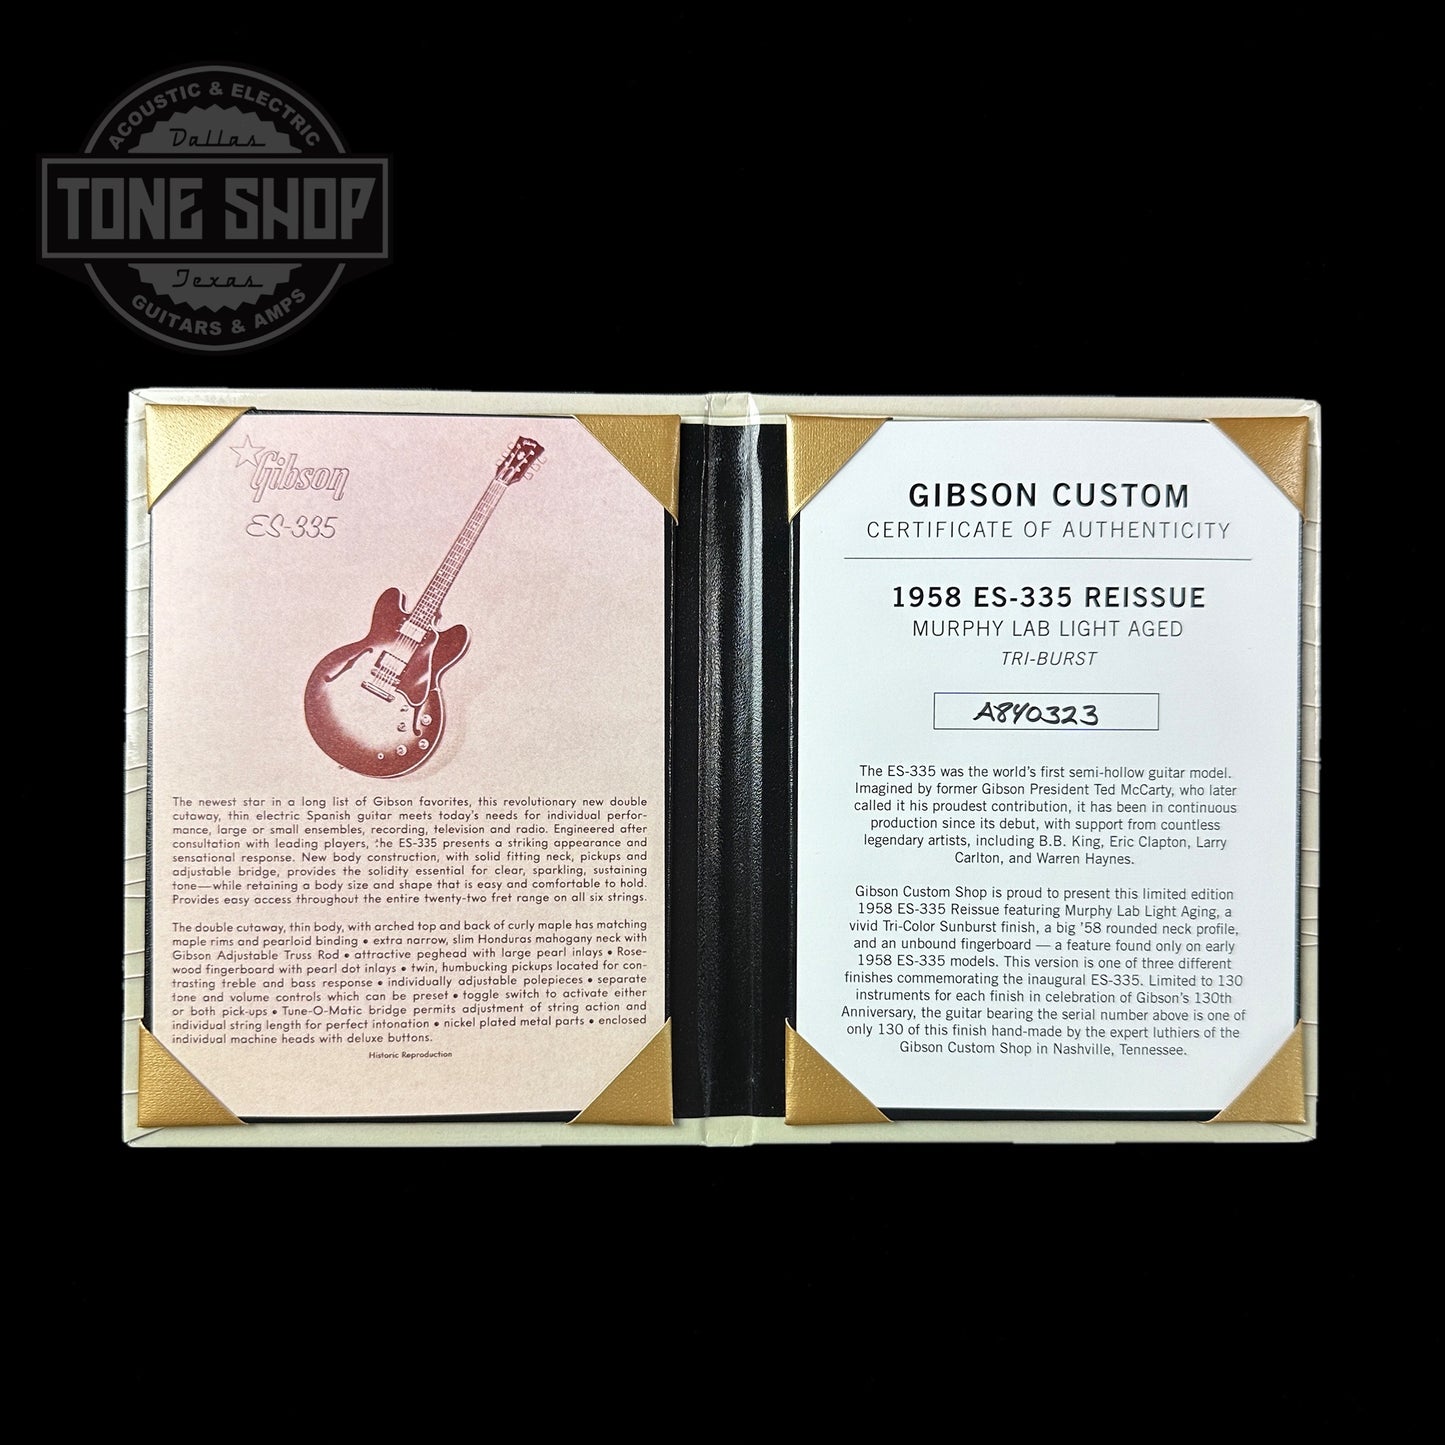 Certificate of authenticity for Gibson Custom Shop 1958 ES-335 Tri-burst Murphy Lab Light Aged Limited.